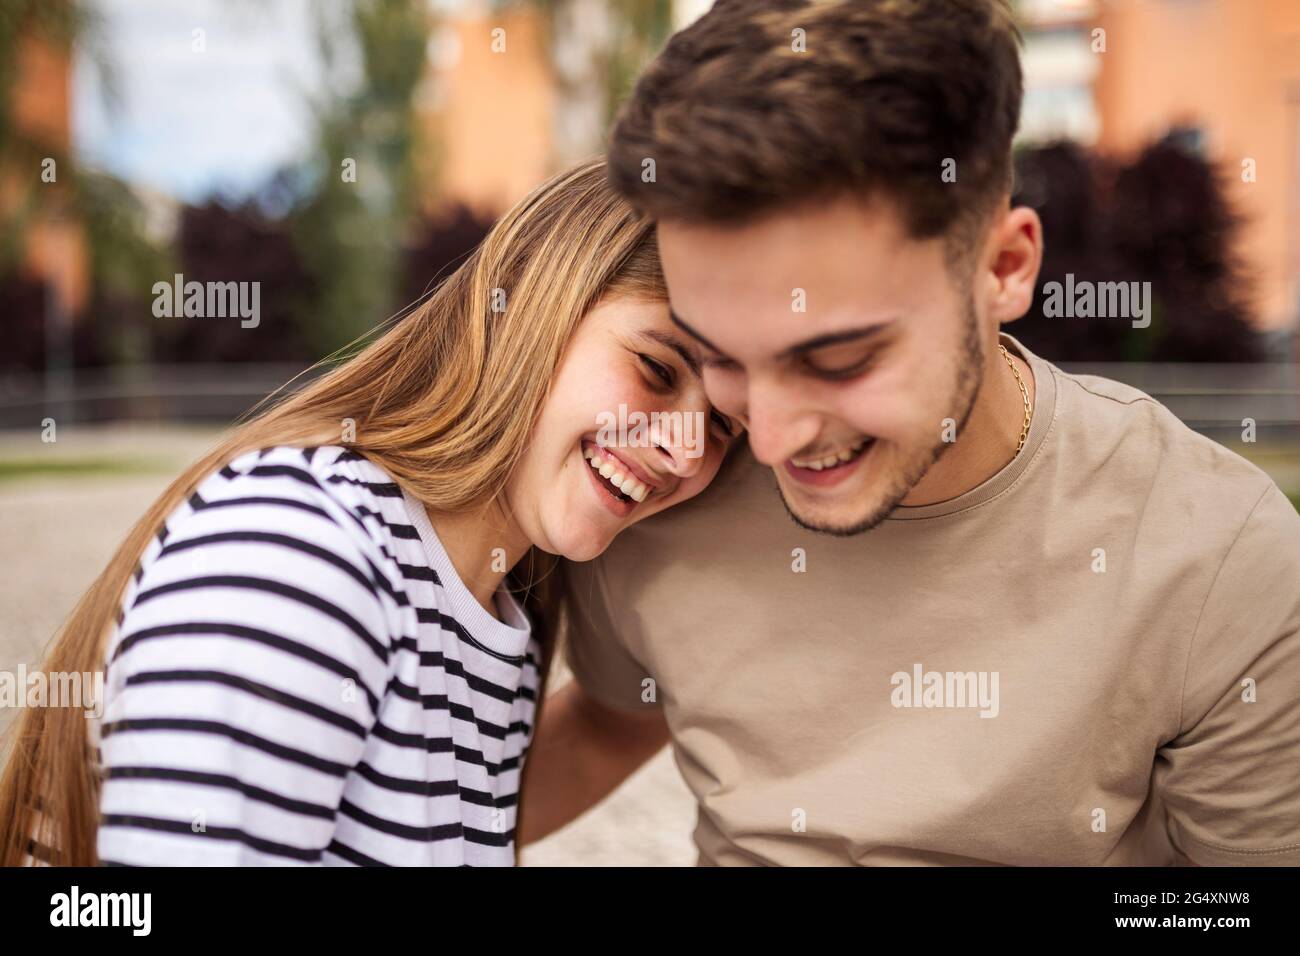 Smiling girlfriend with head on shoulder of boyfriend Stock Photo